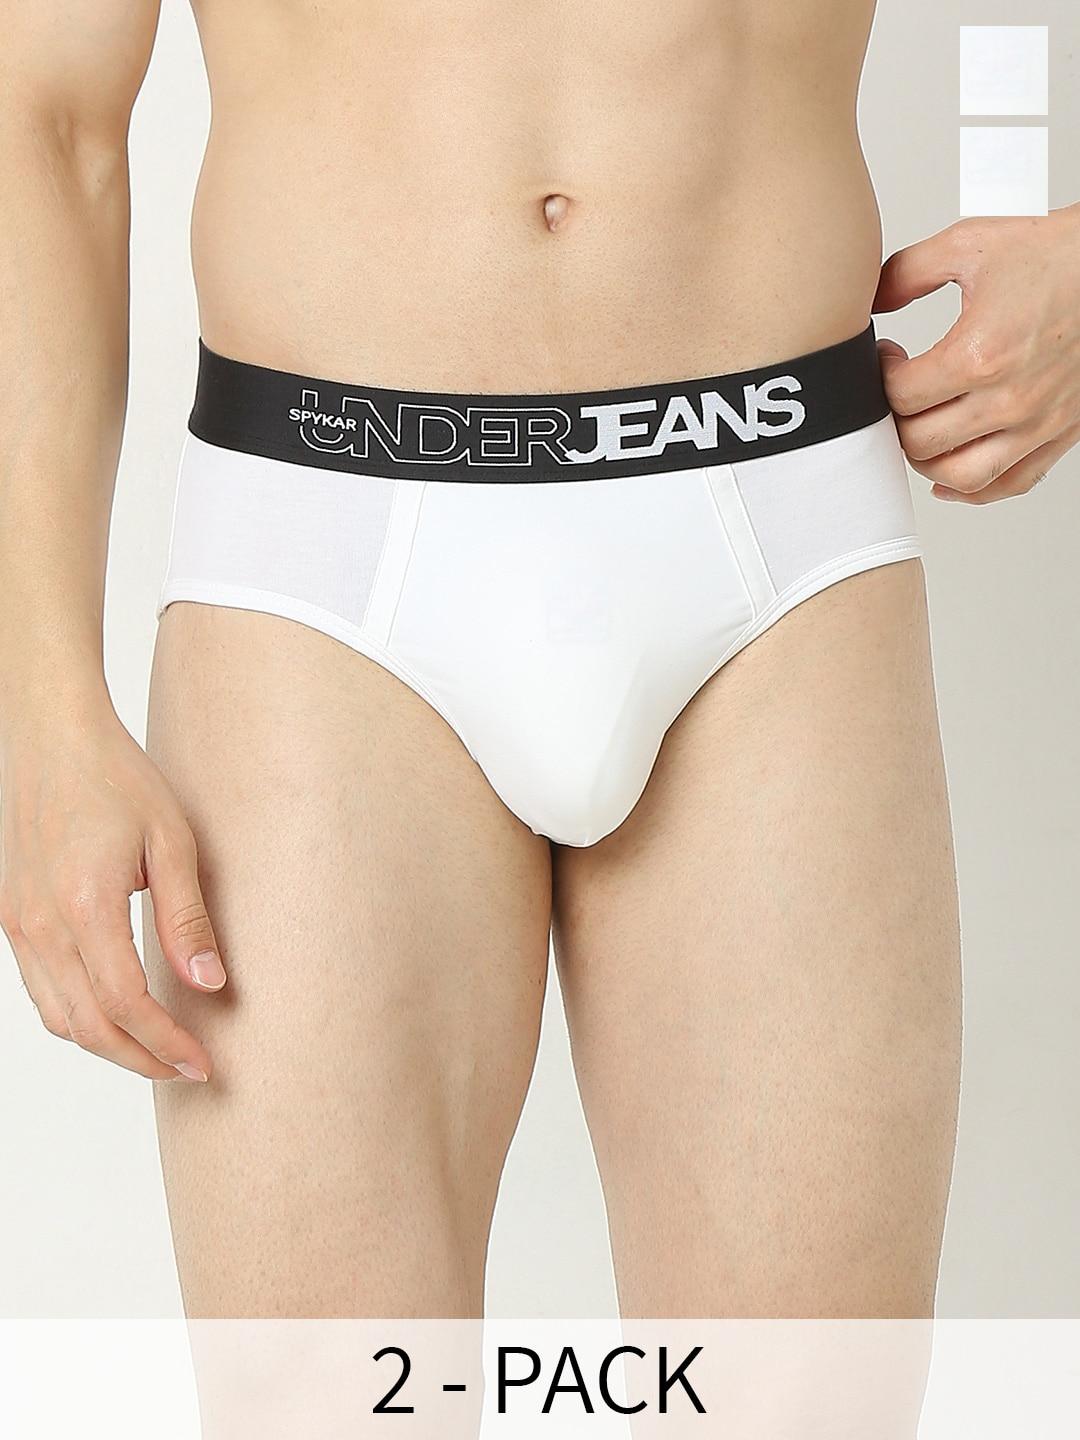 underjeans-by-spykar-pack-of-2-mid-rise-briefs-ujnpbc055whitewhite